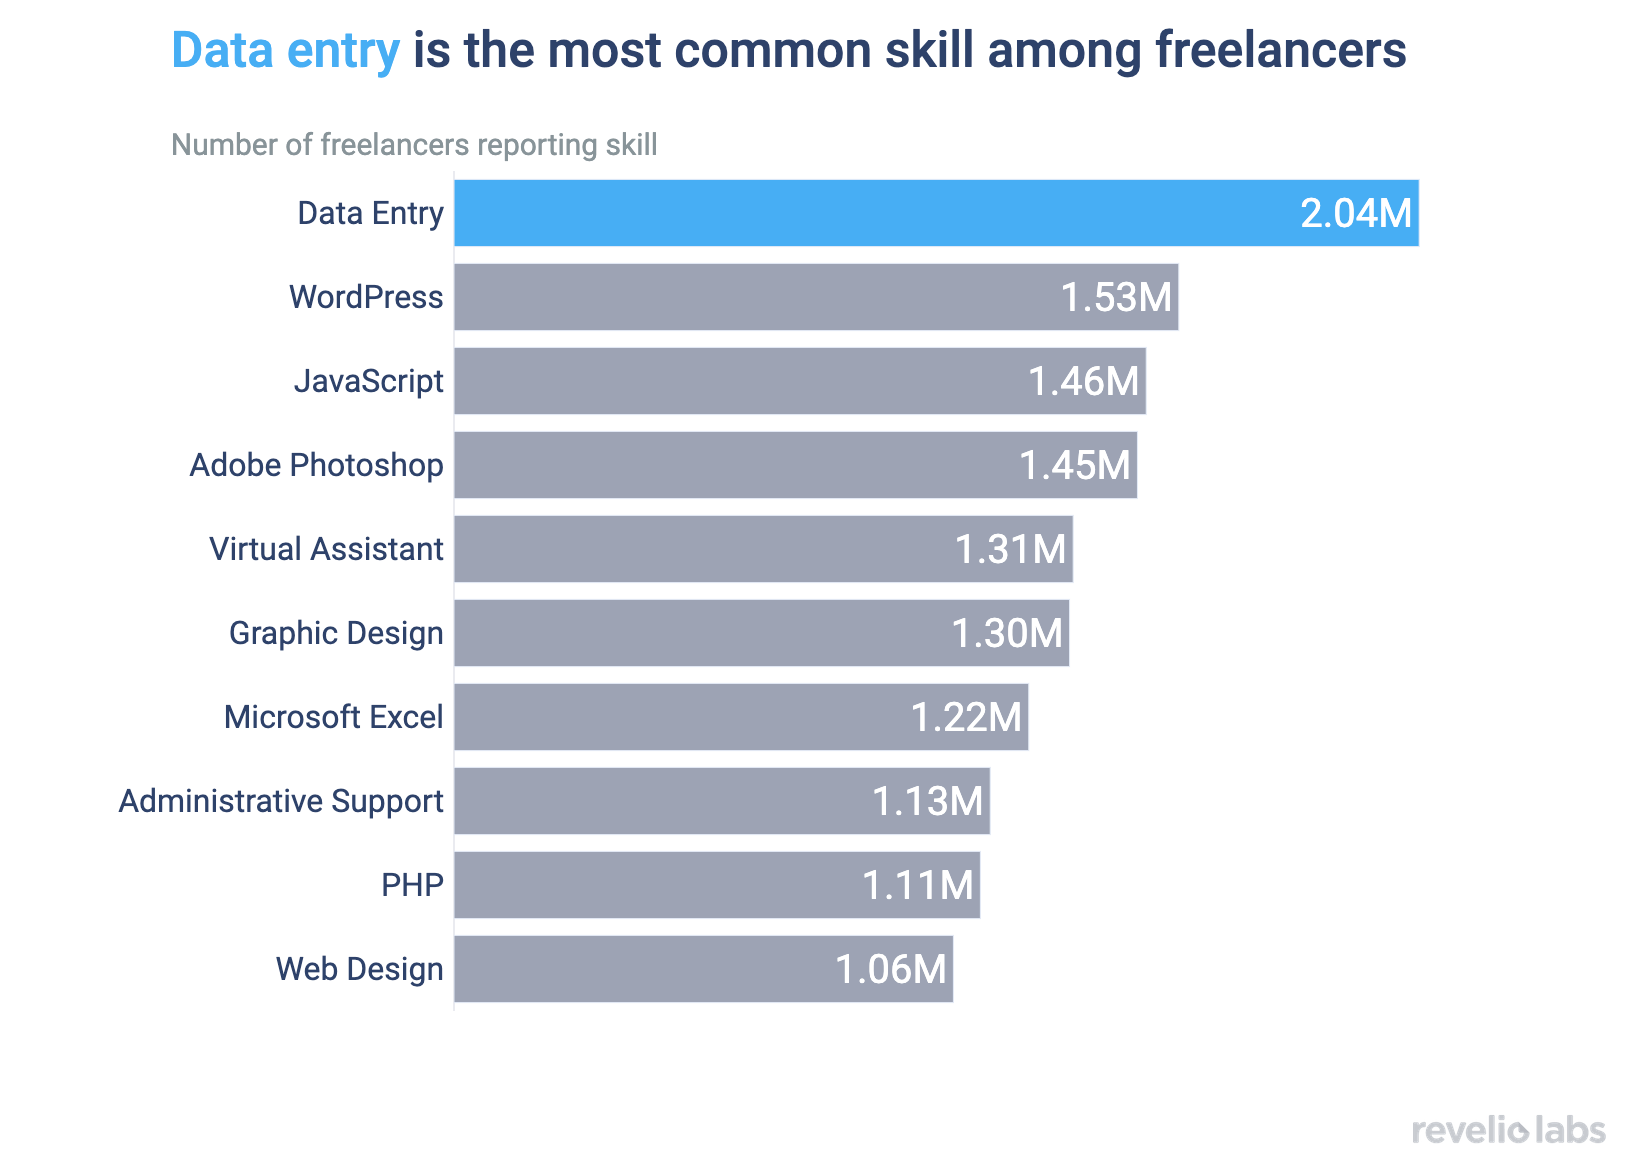 Data entry is the most common skill among freelancers